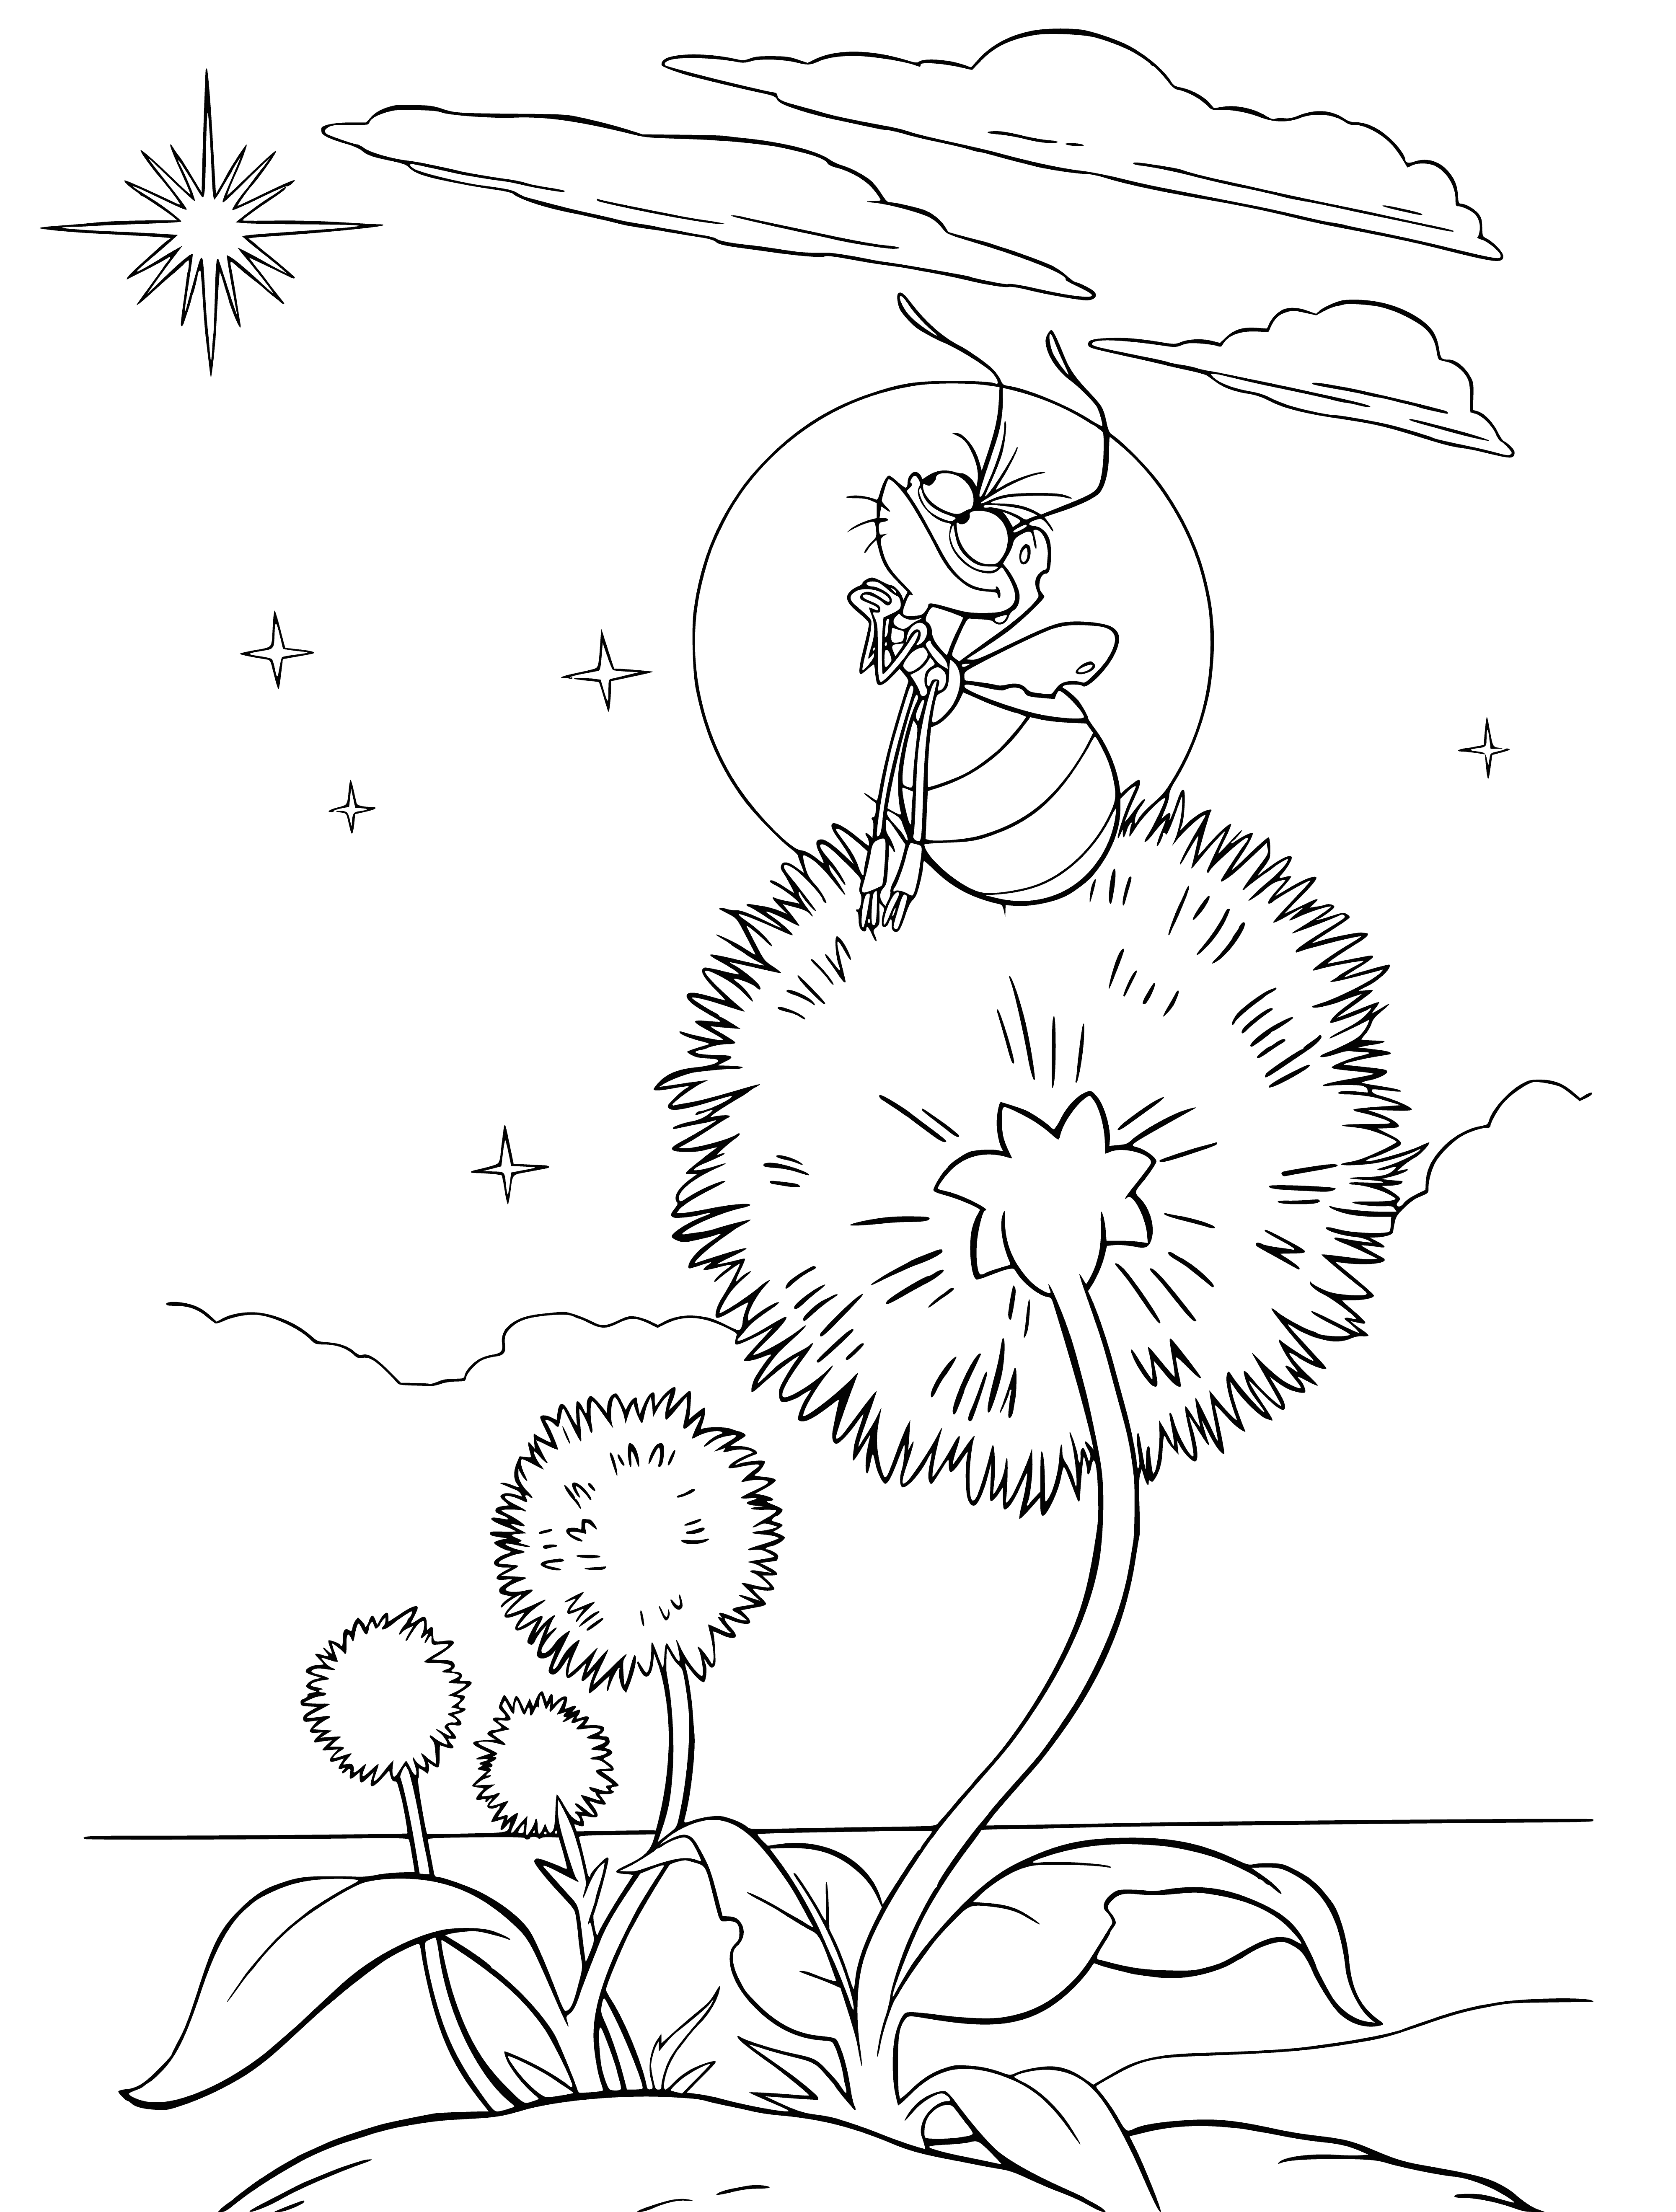 coloring page: Ray has a crush on Evangeline and is trying to talk to her as she gazes out the window at fireflies.